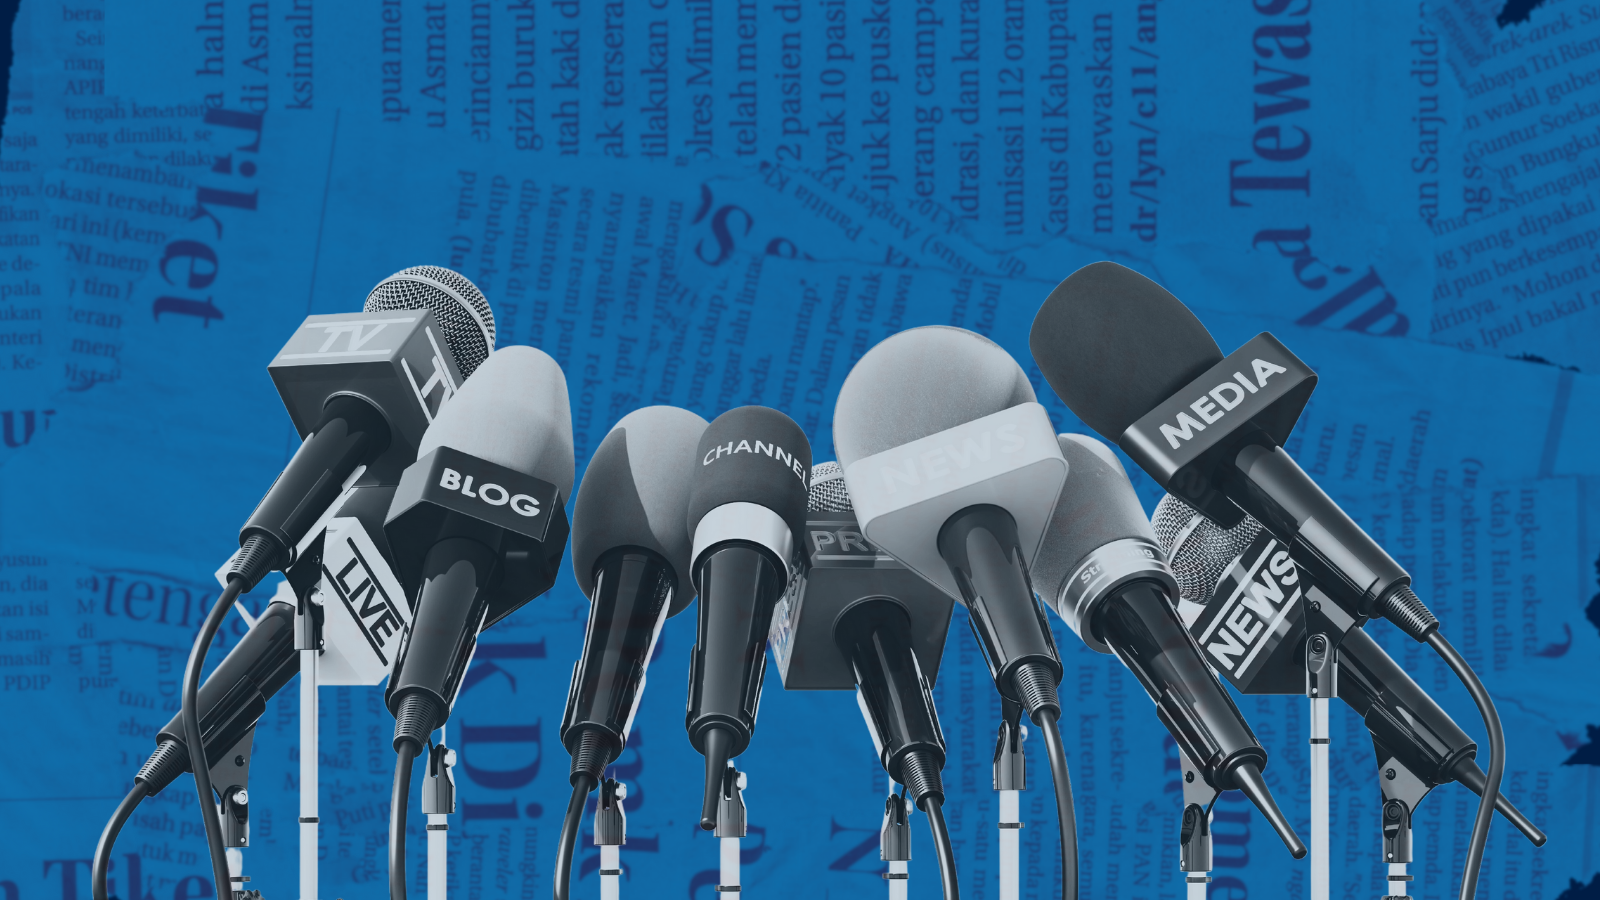 Blue background with newspaper clippings and black and white image of microphones